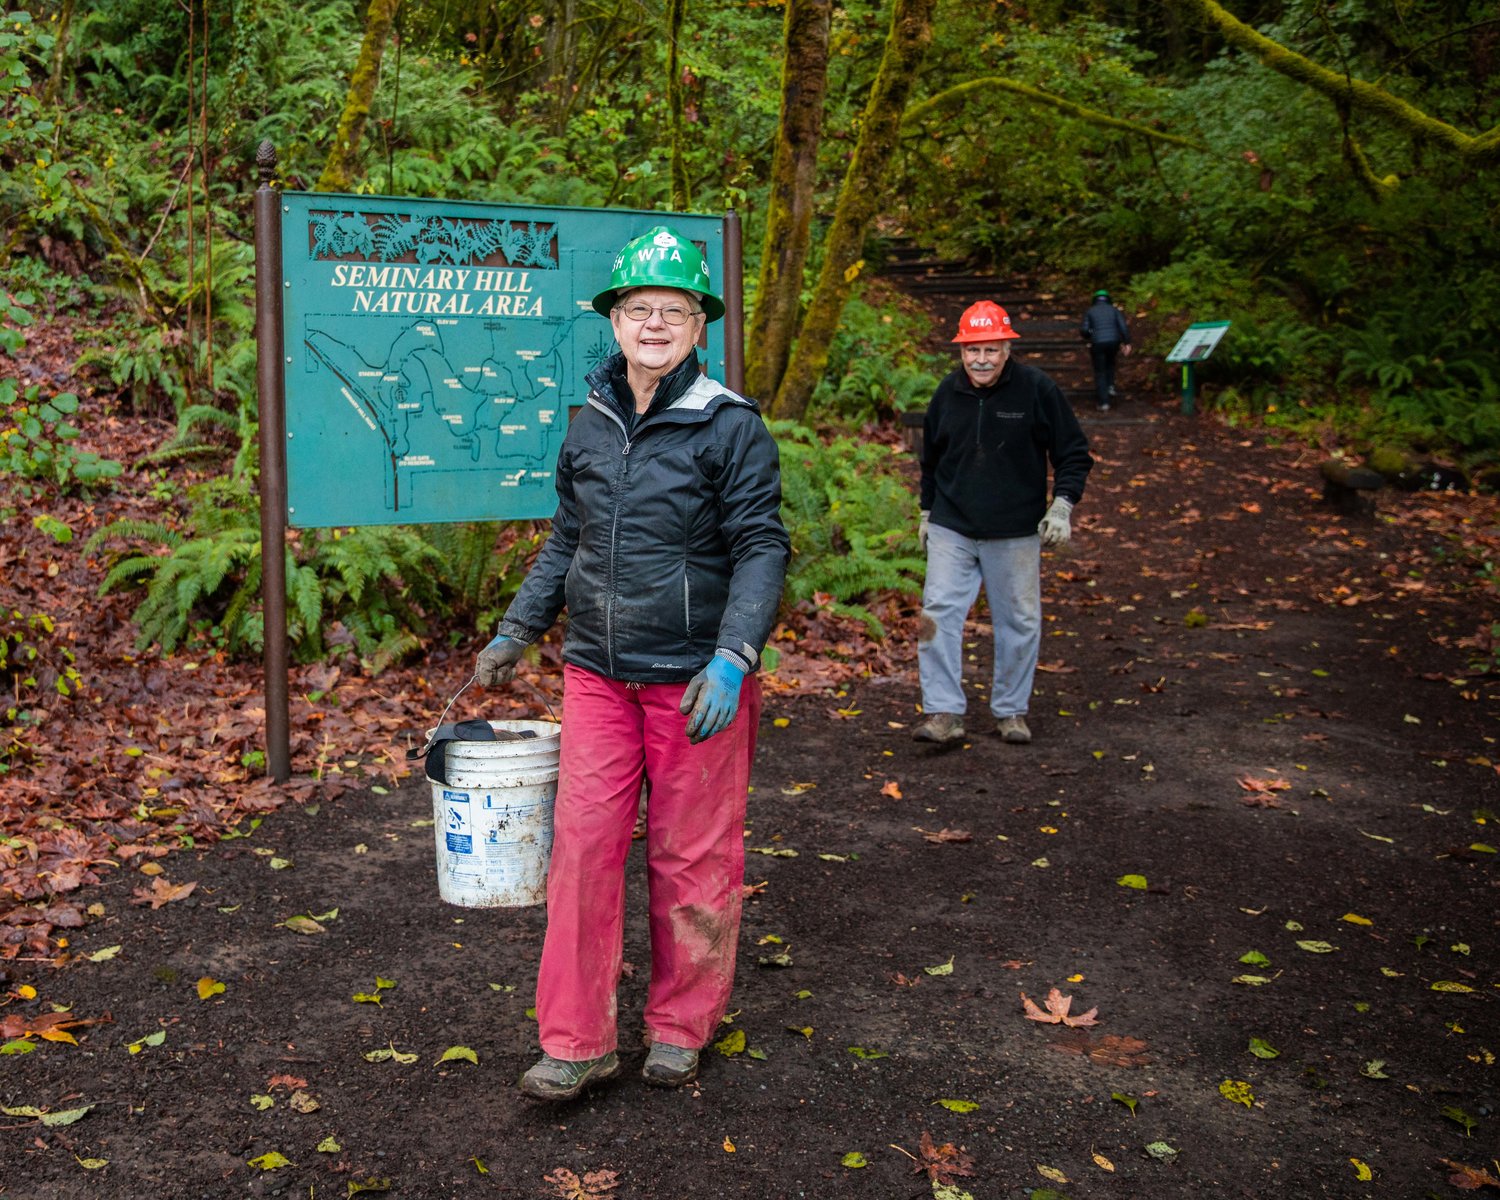 Ginger Sarver smiles while carrying a bucket and helping with trail work at the Seminary Hill Natural Area in Centralia on Wednesday.